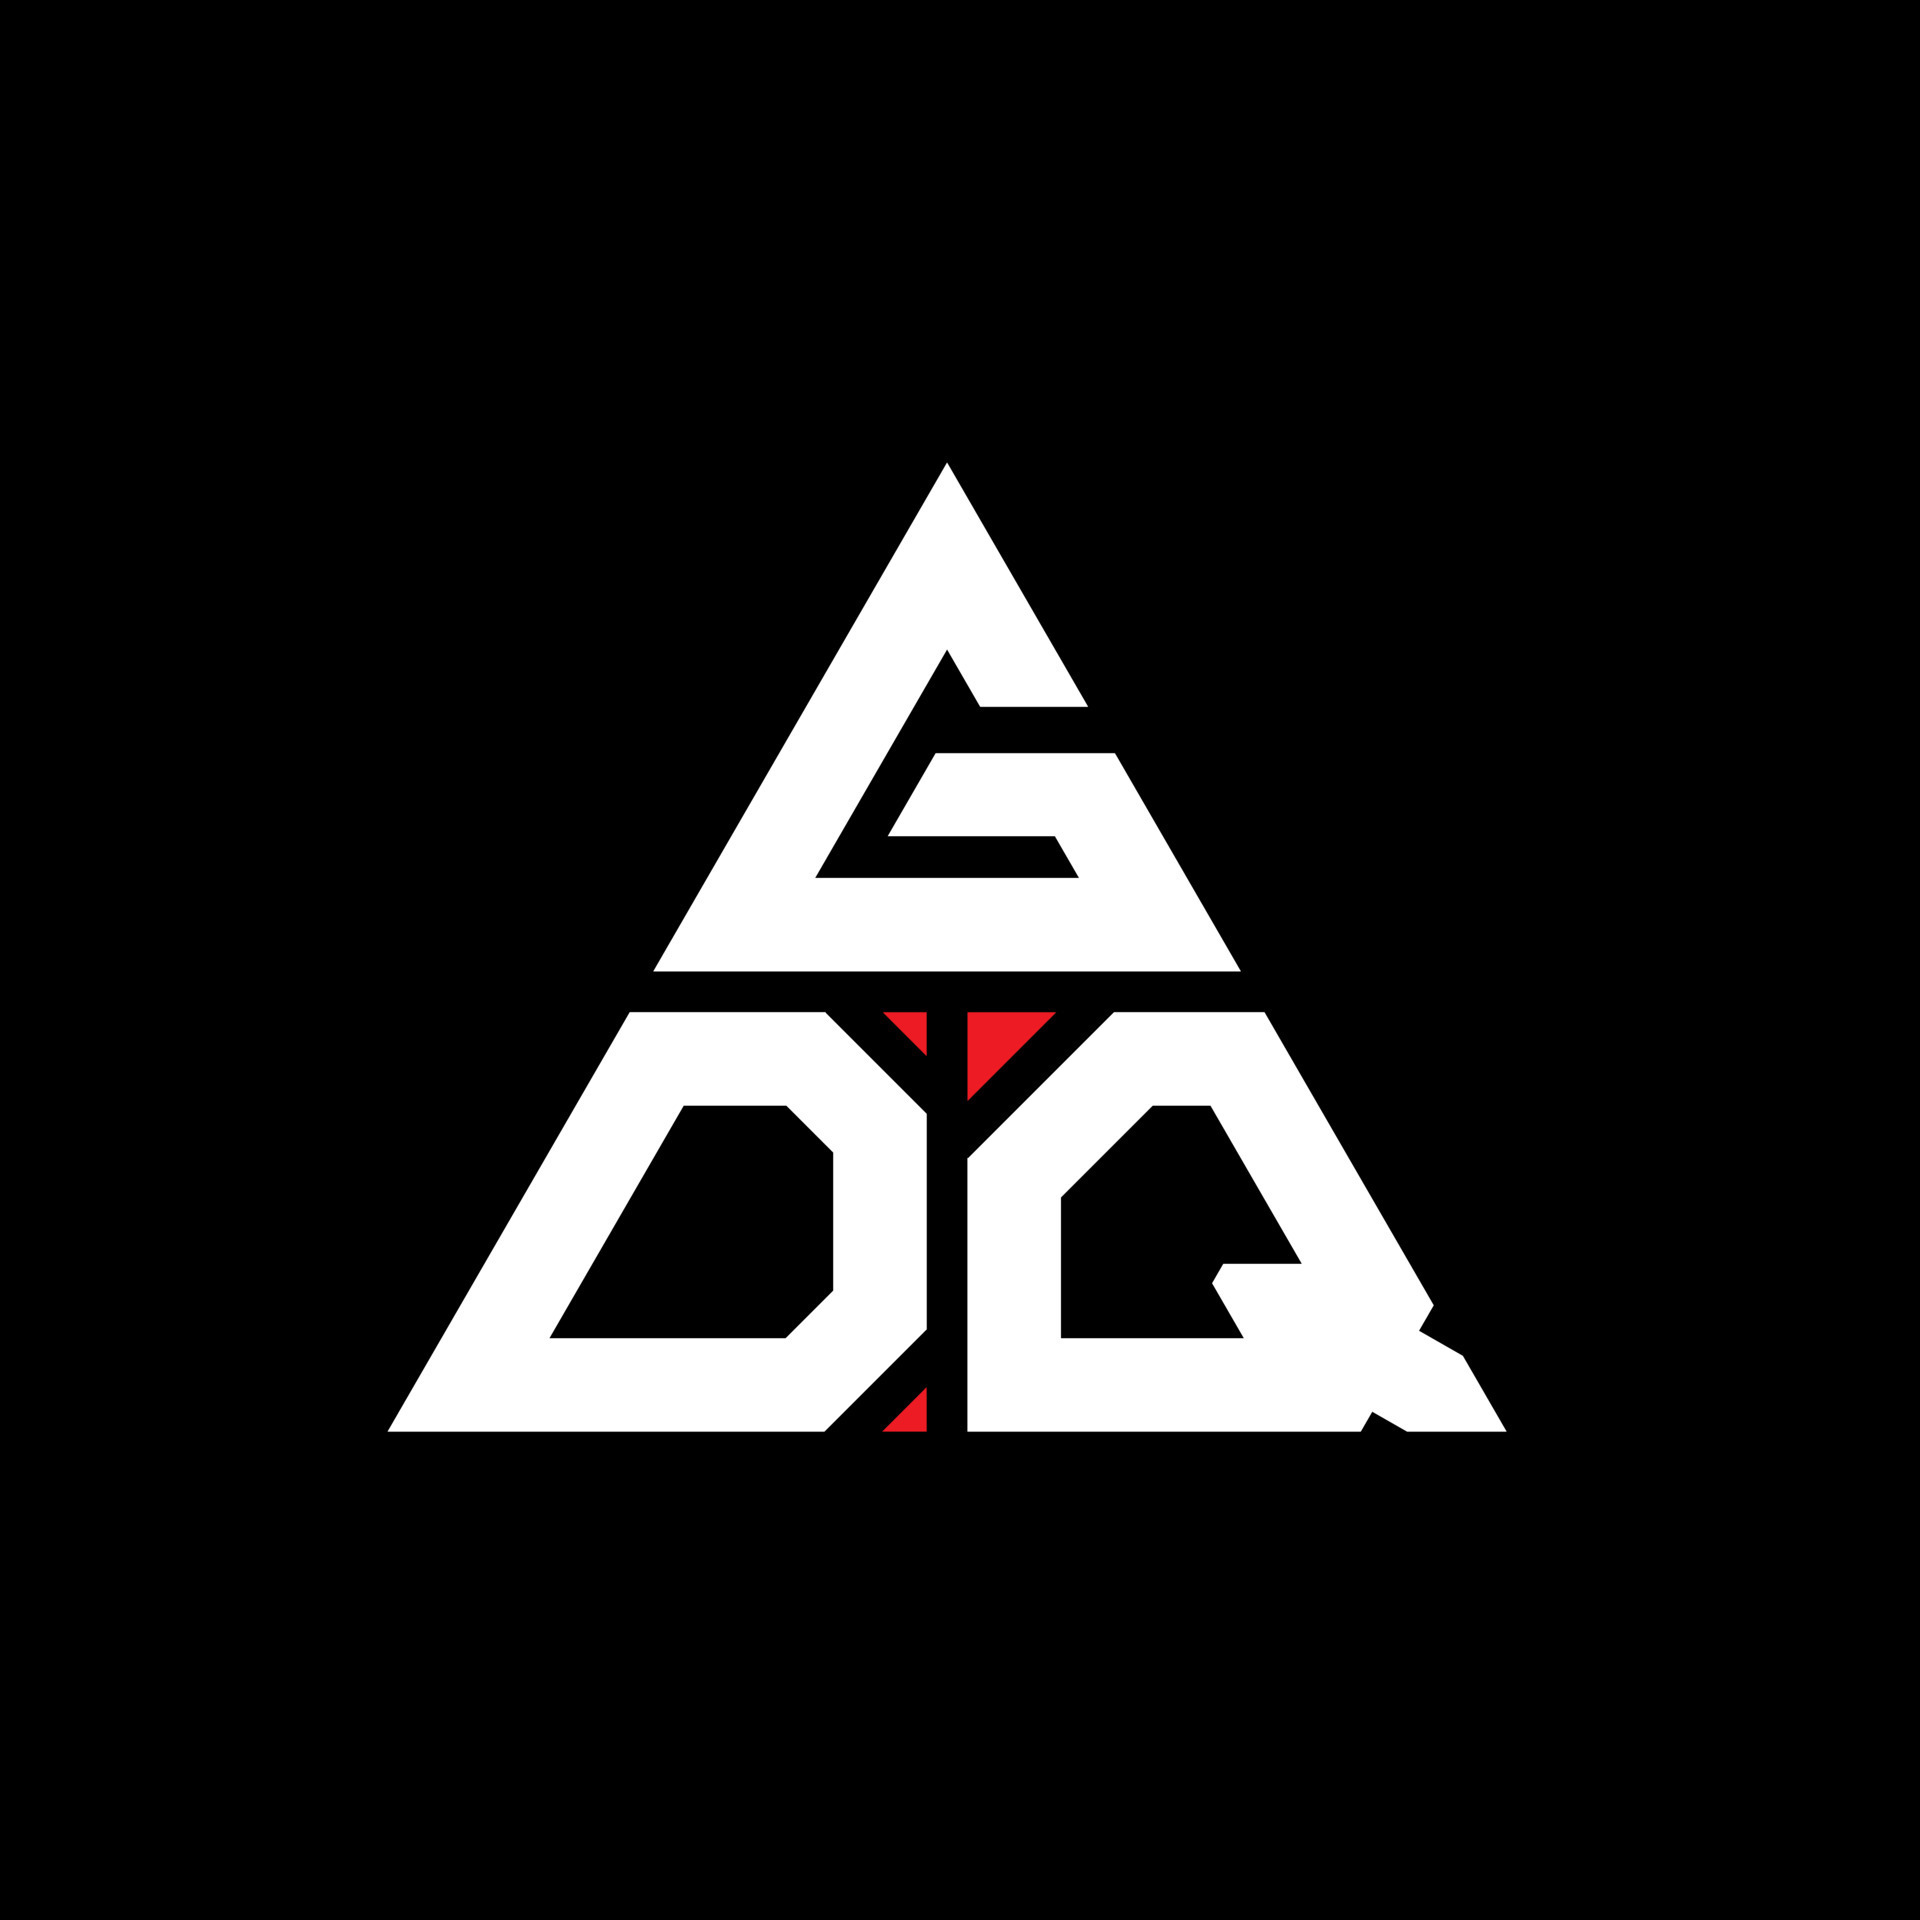 GDQ triangle letter logo design with triangle shape. GDQ triangle logo